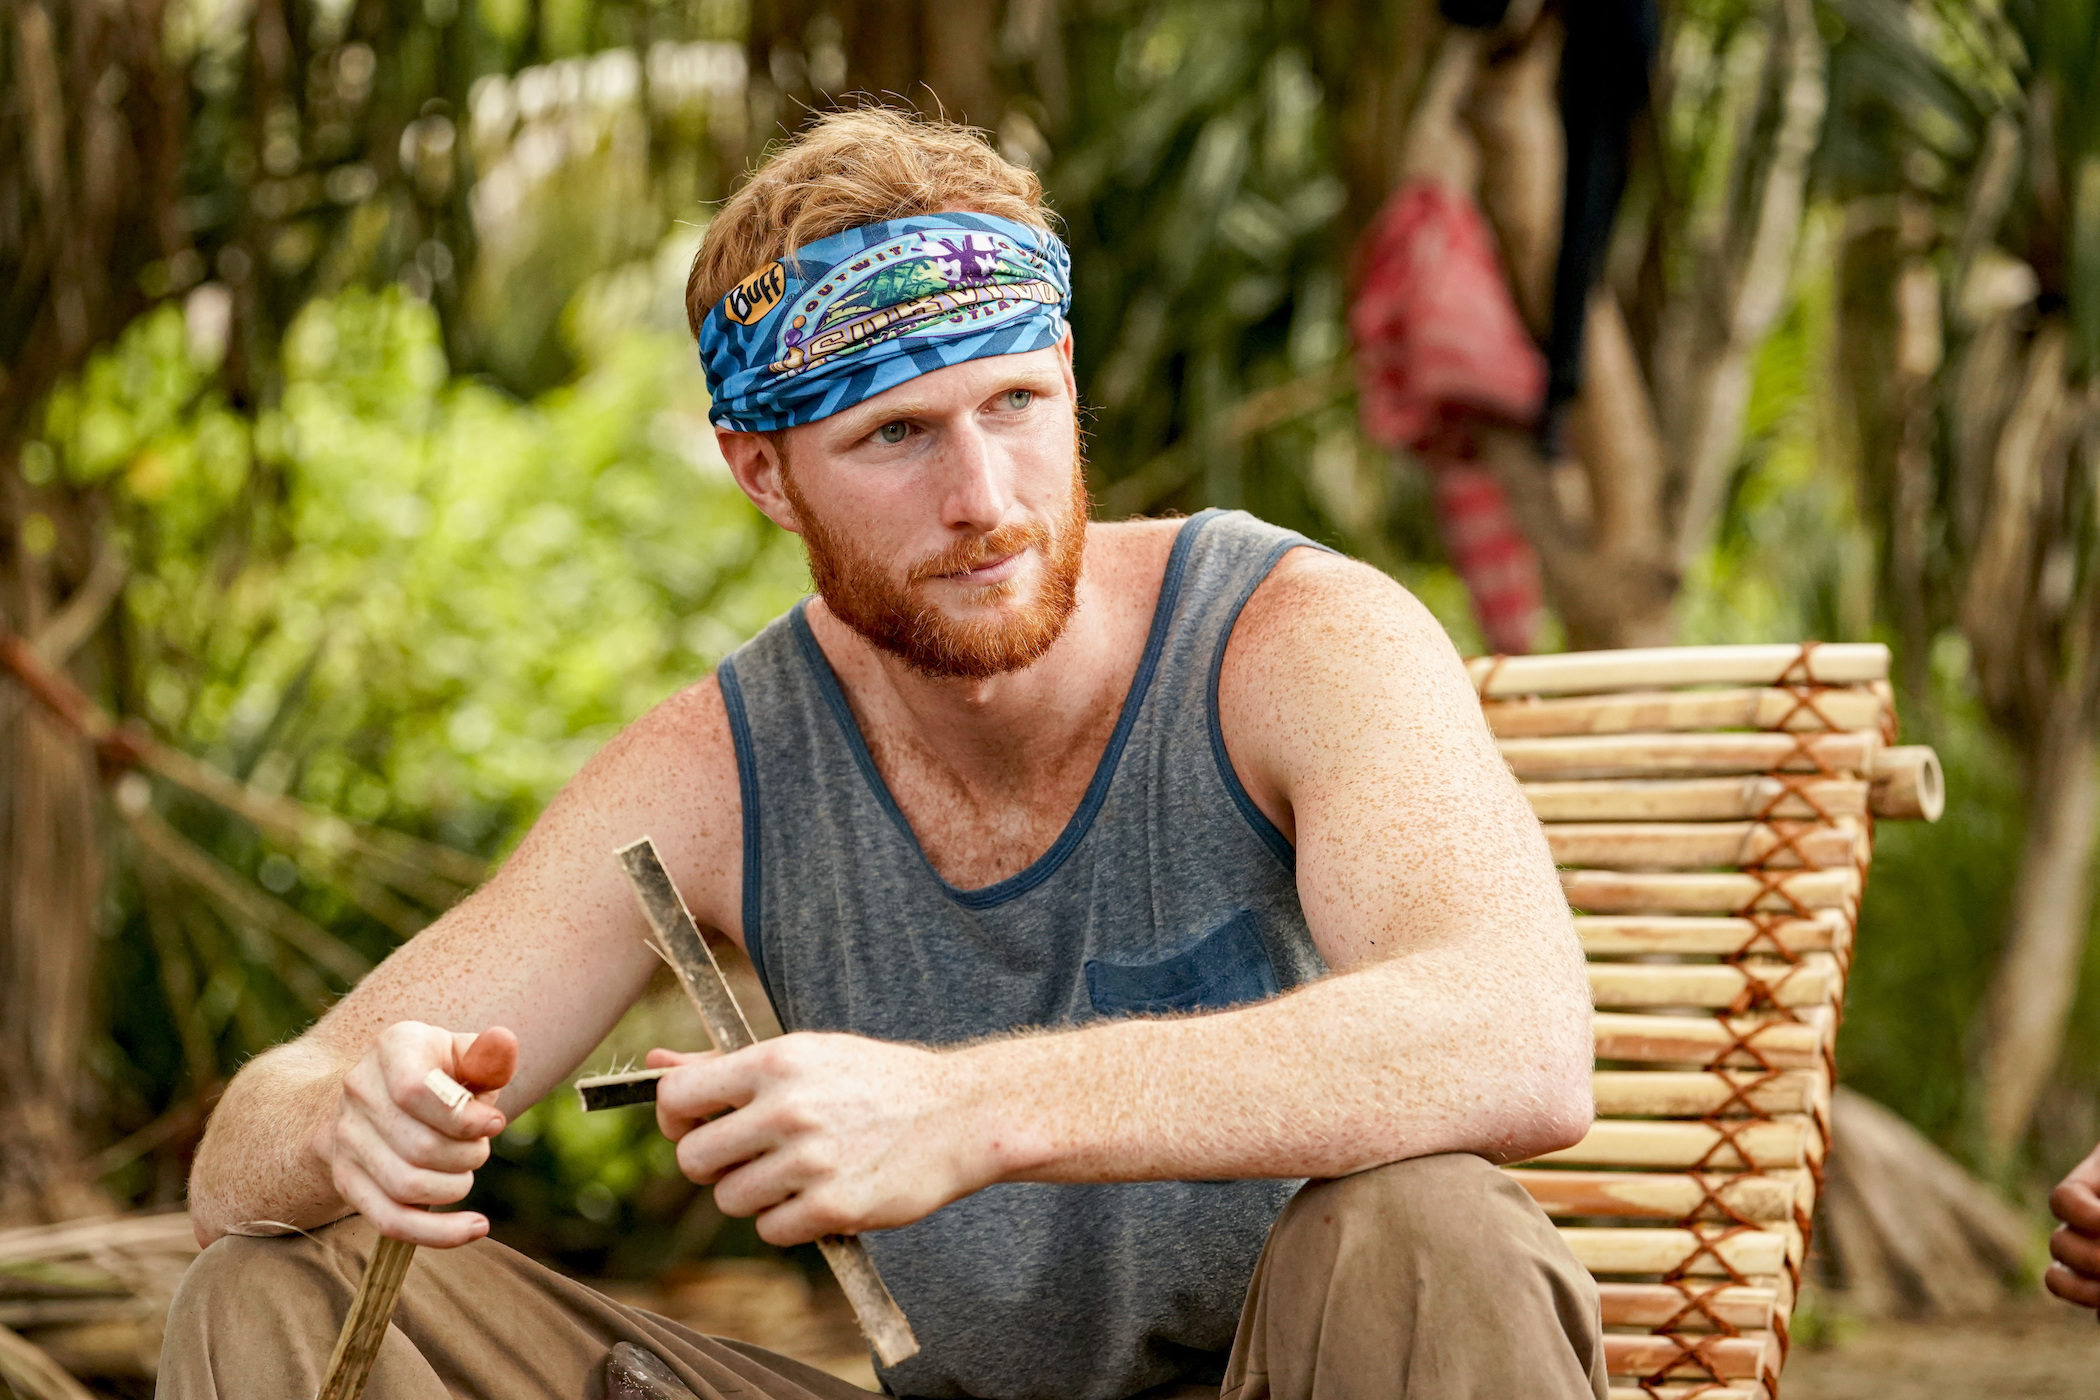 Tommy Sheehan, a future player on MTV's 'The Challenge,' on 'Survivor: Island of the Idols' 